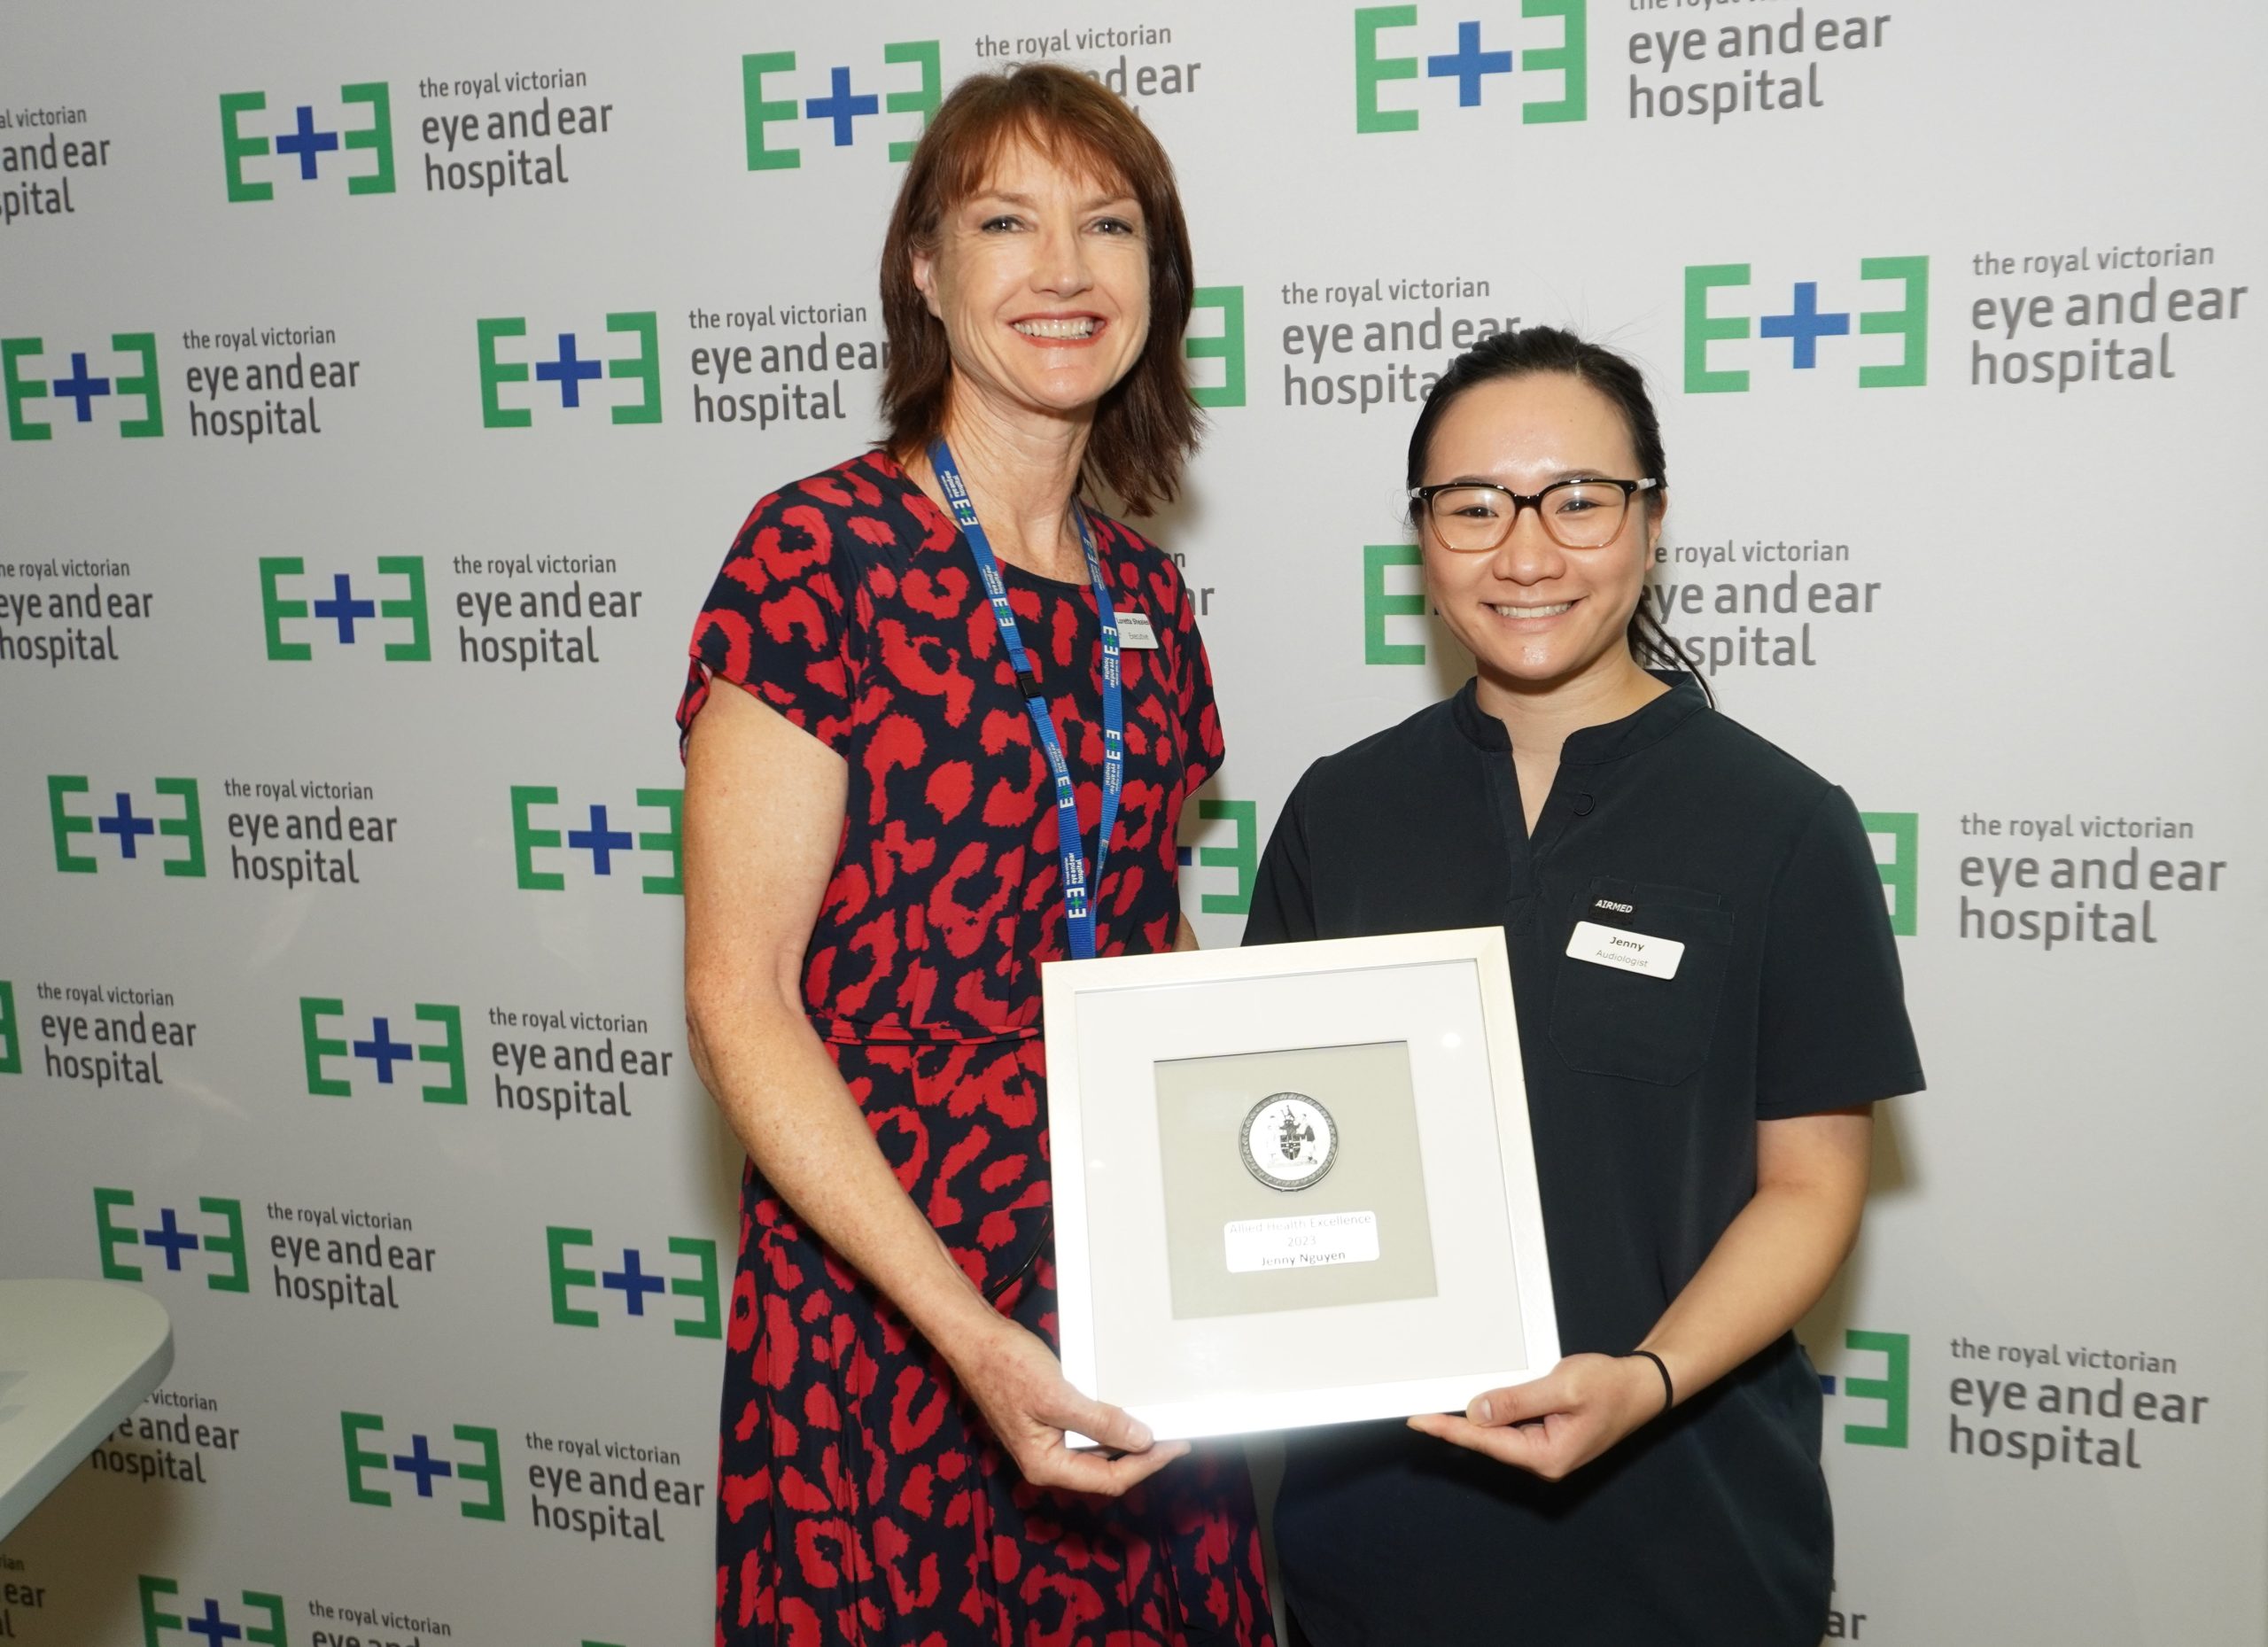 Executive Director Loretta Sheales presenting the Allied Health Award to Jenny Nguyen. They stand together, smiling, against and Eye and Ear logo backdrop